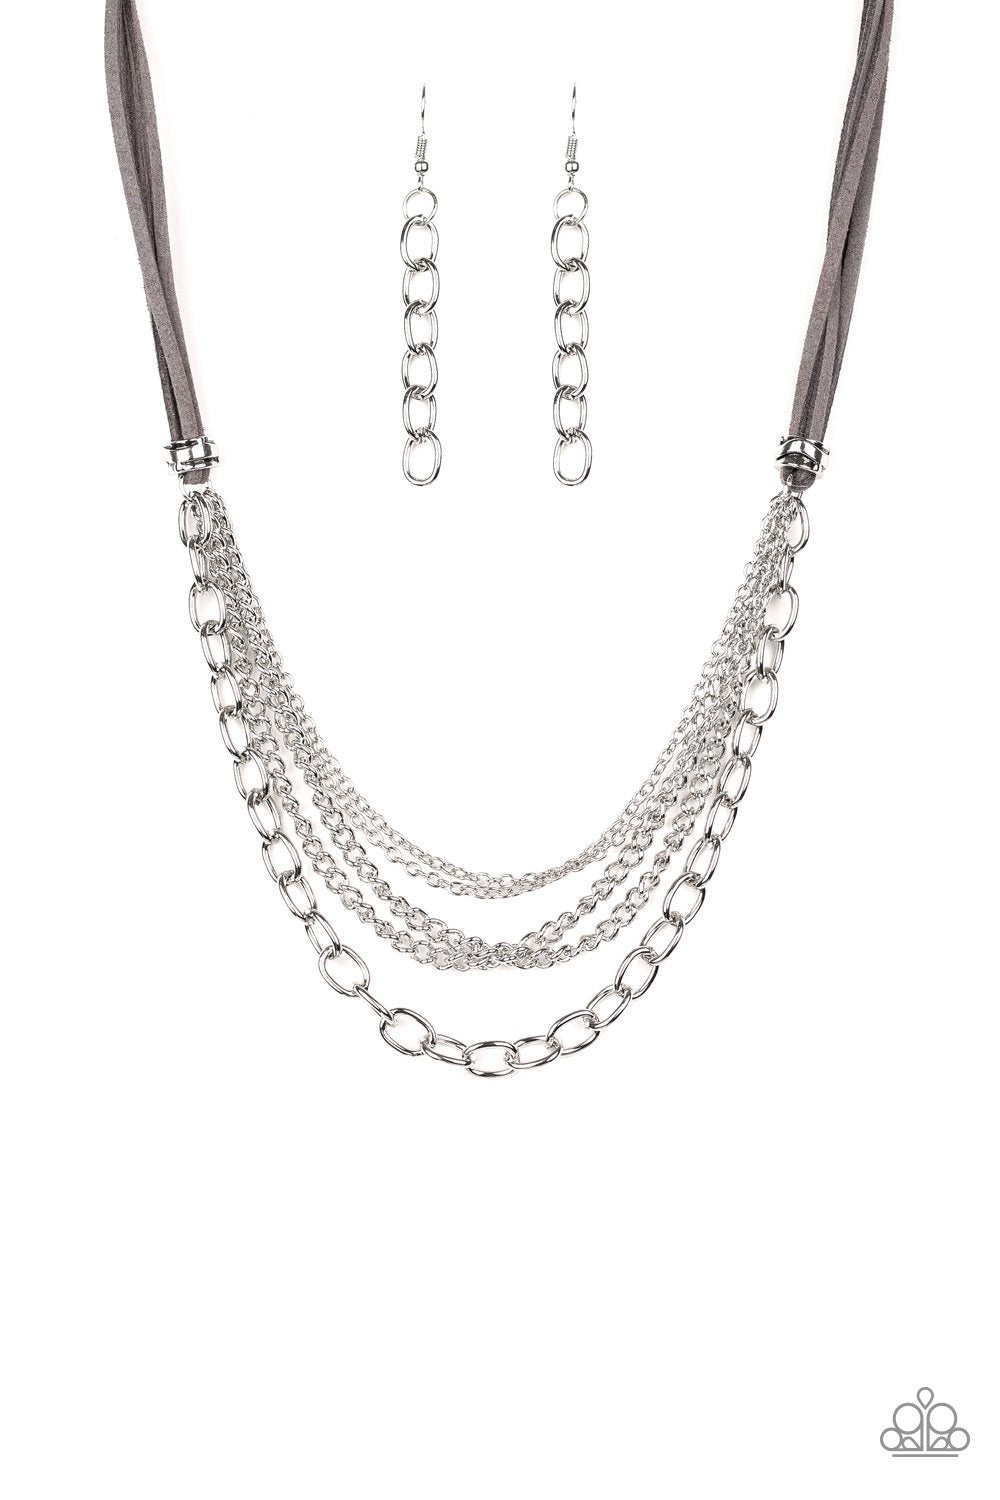 Free Roamer Silver Suede and Chain Necklace - Paparazzi Accessories-CarasShop.com - $5 Jewelry by Cara Jewels